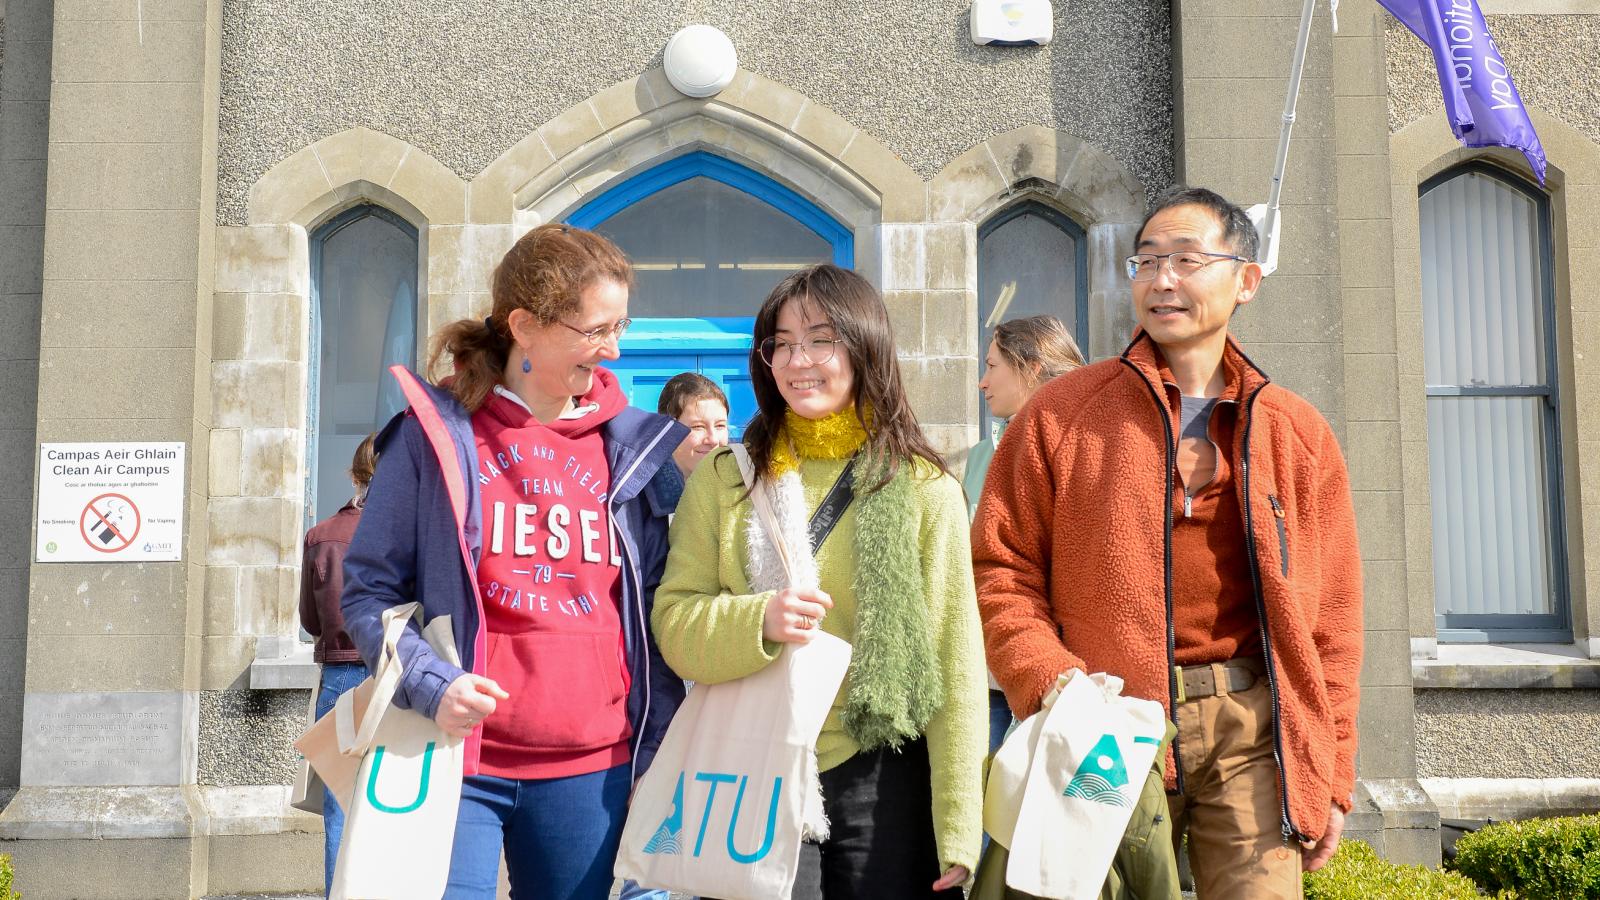 Open Day visitors at ATU Galway City, Wellpark ROad campus